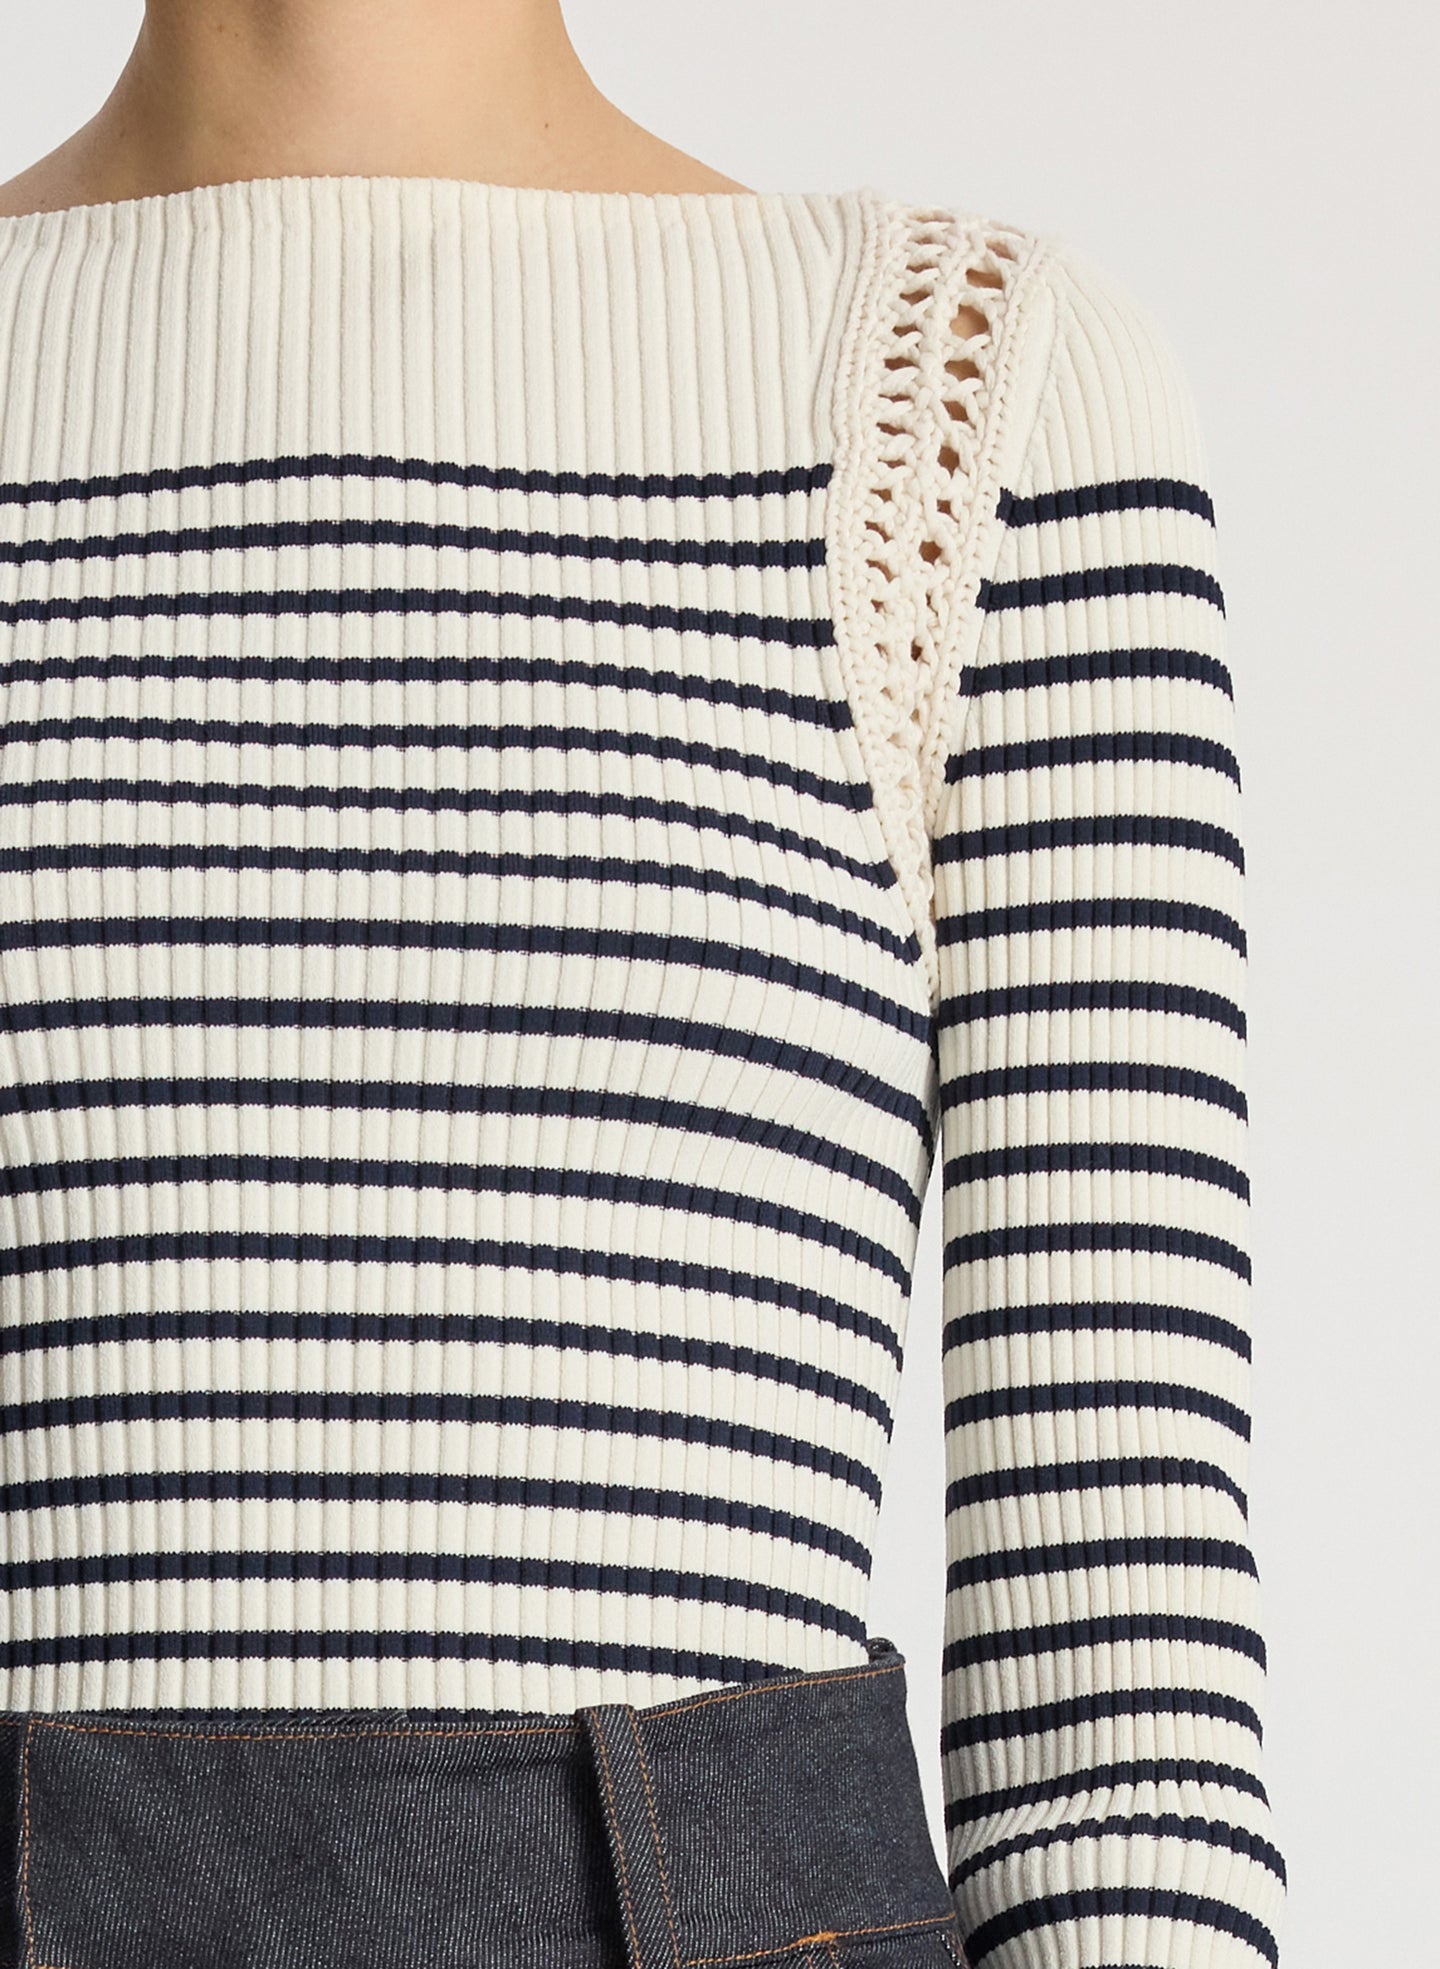 detail view of woman wearing white and navy striped top with long bell sleeves and dark wash raw denim jeans